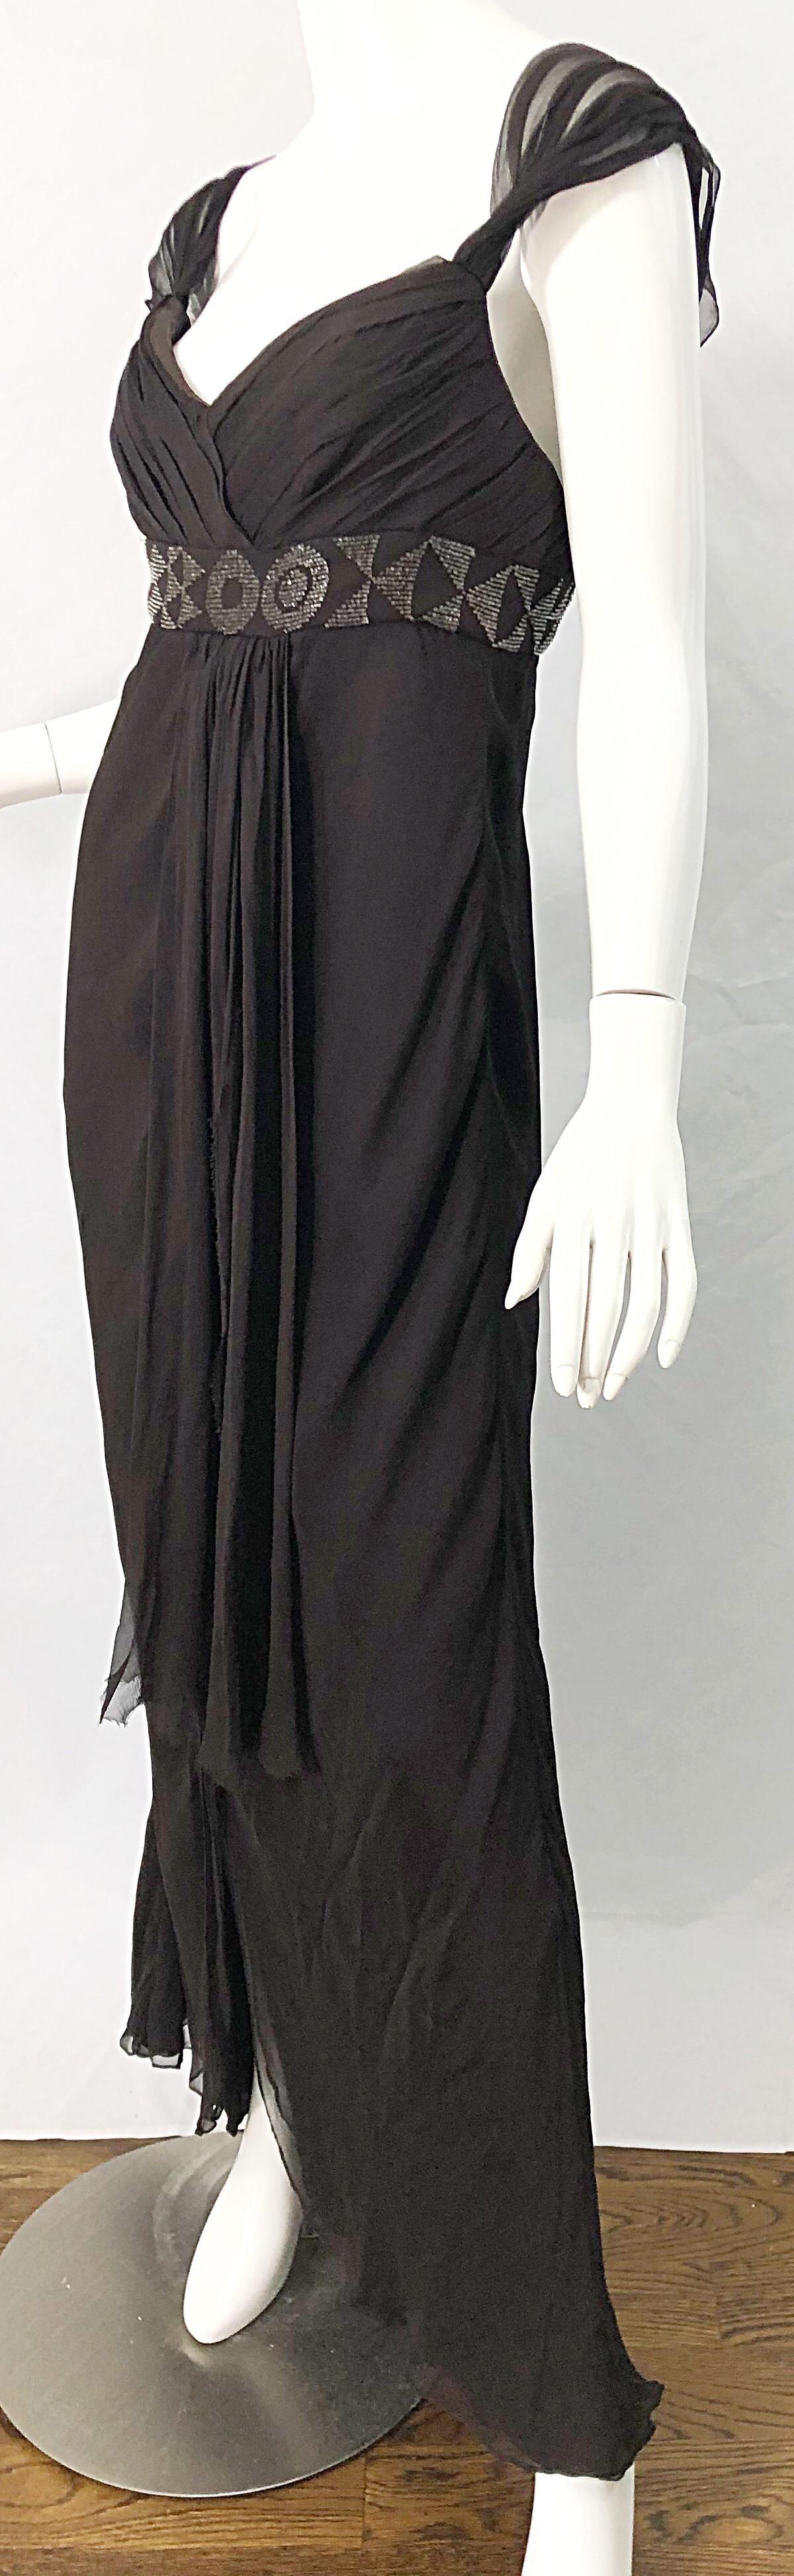 J Mendel Size 8 Early 2000s Brown Silk Chiffon Beaded Grecian Style Evening Gown For Sale 6